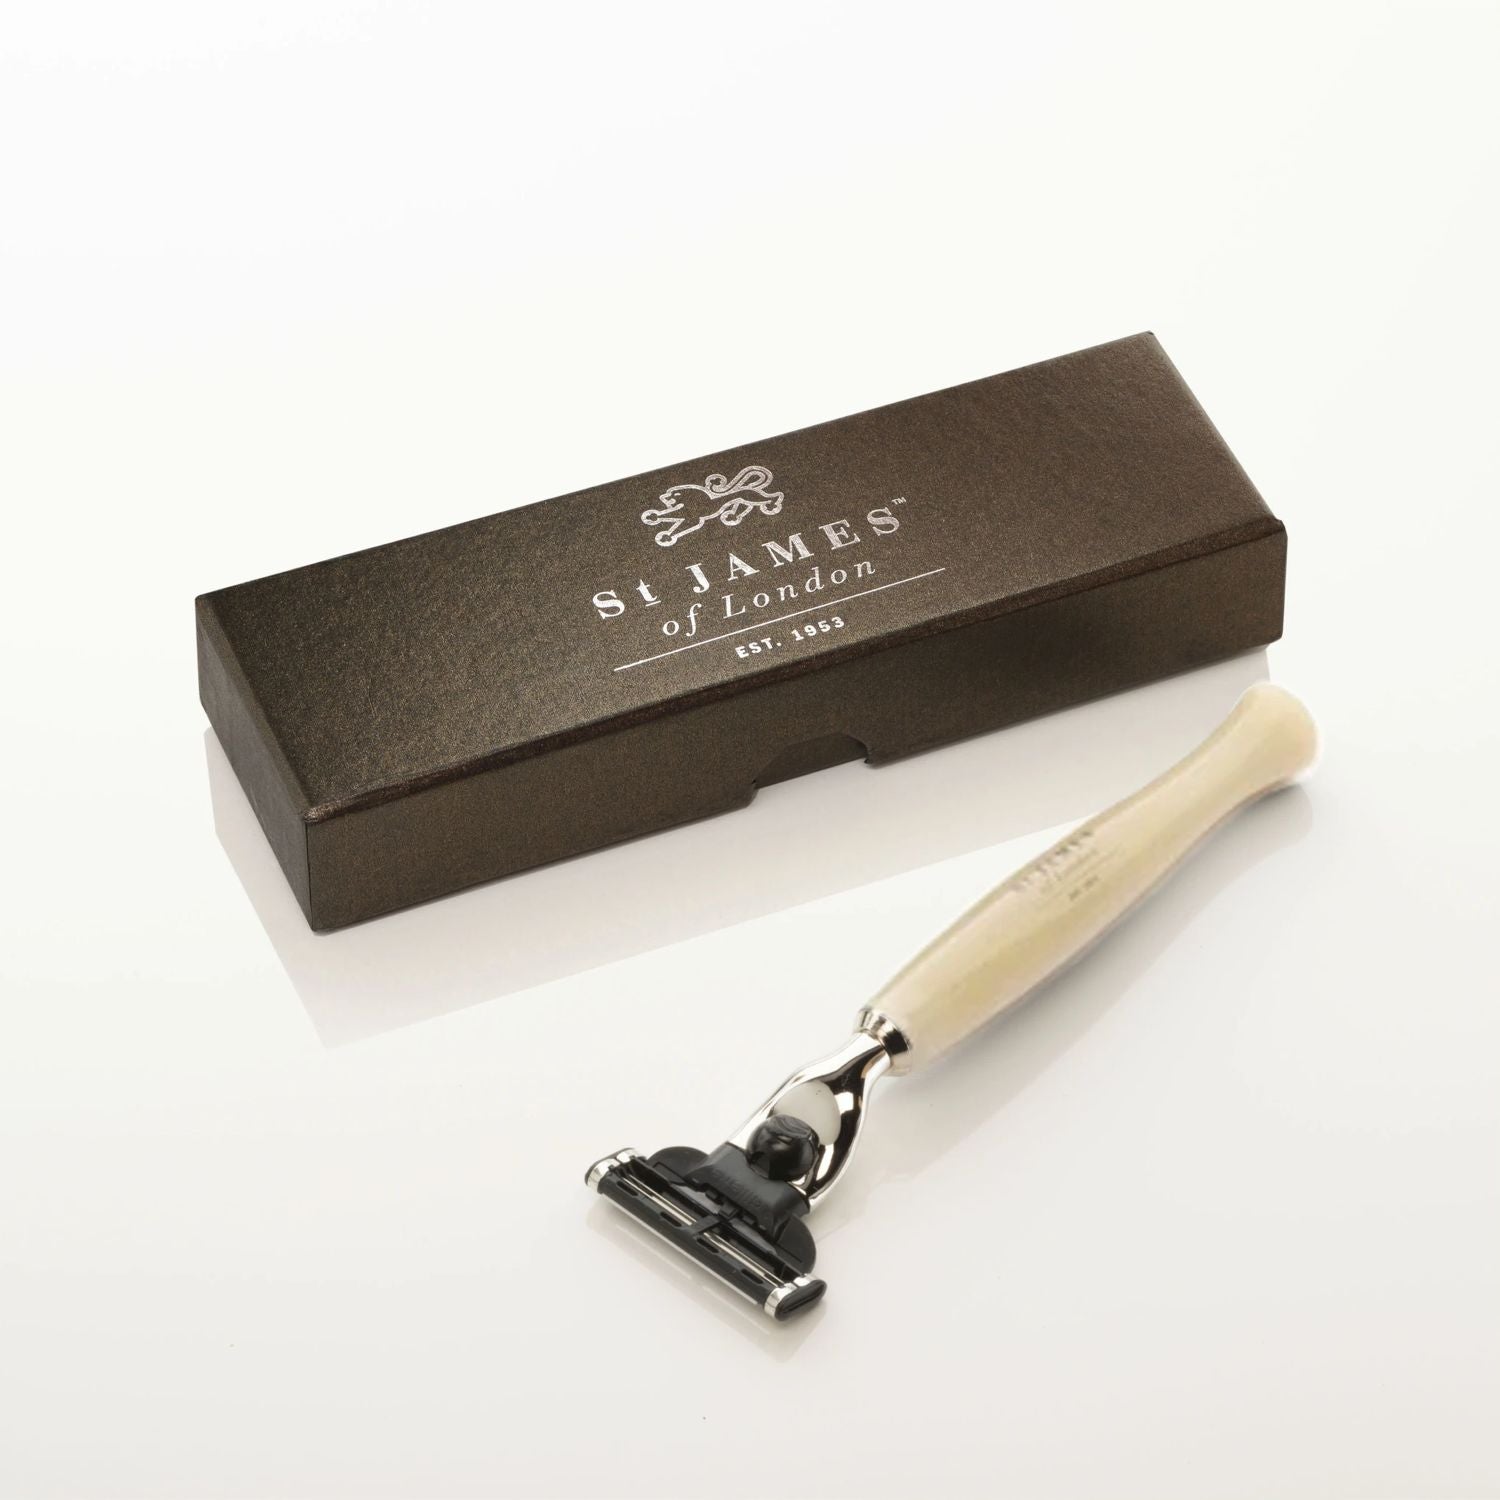 "Cheeky B'stard" Handcrafted 'Mach III' Razor in Horn by St. James of London